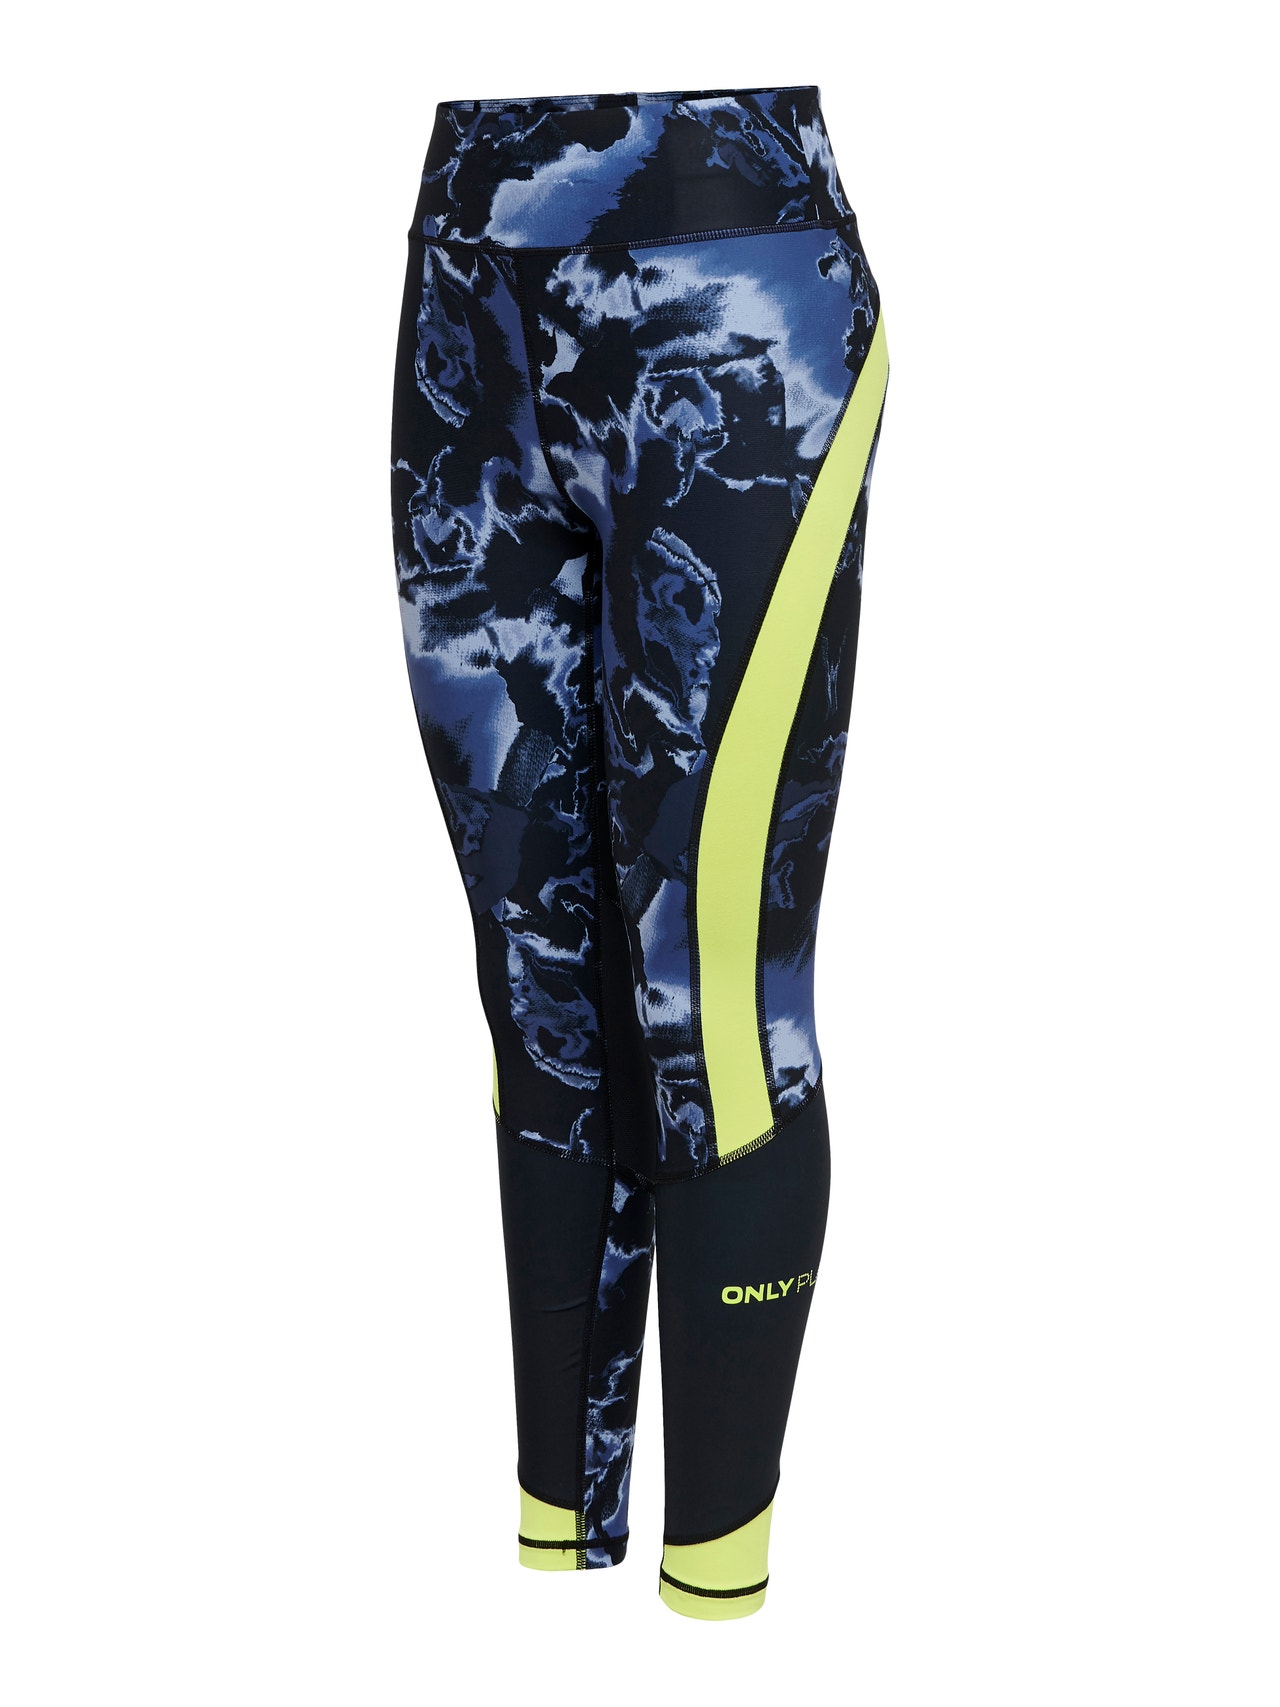 ONLY Printed Training Tights -Blue Graphite - 15236780